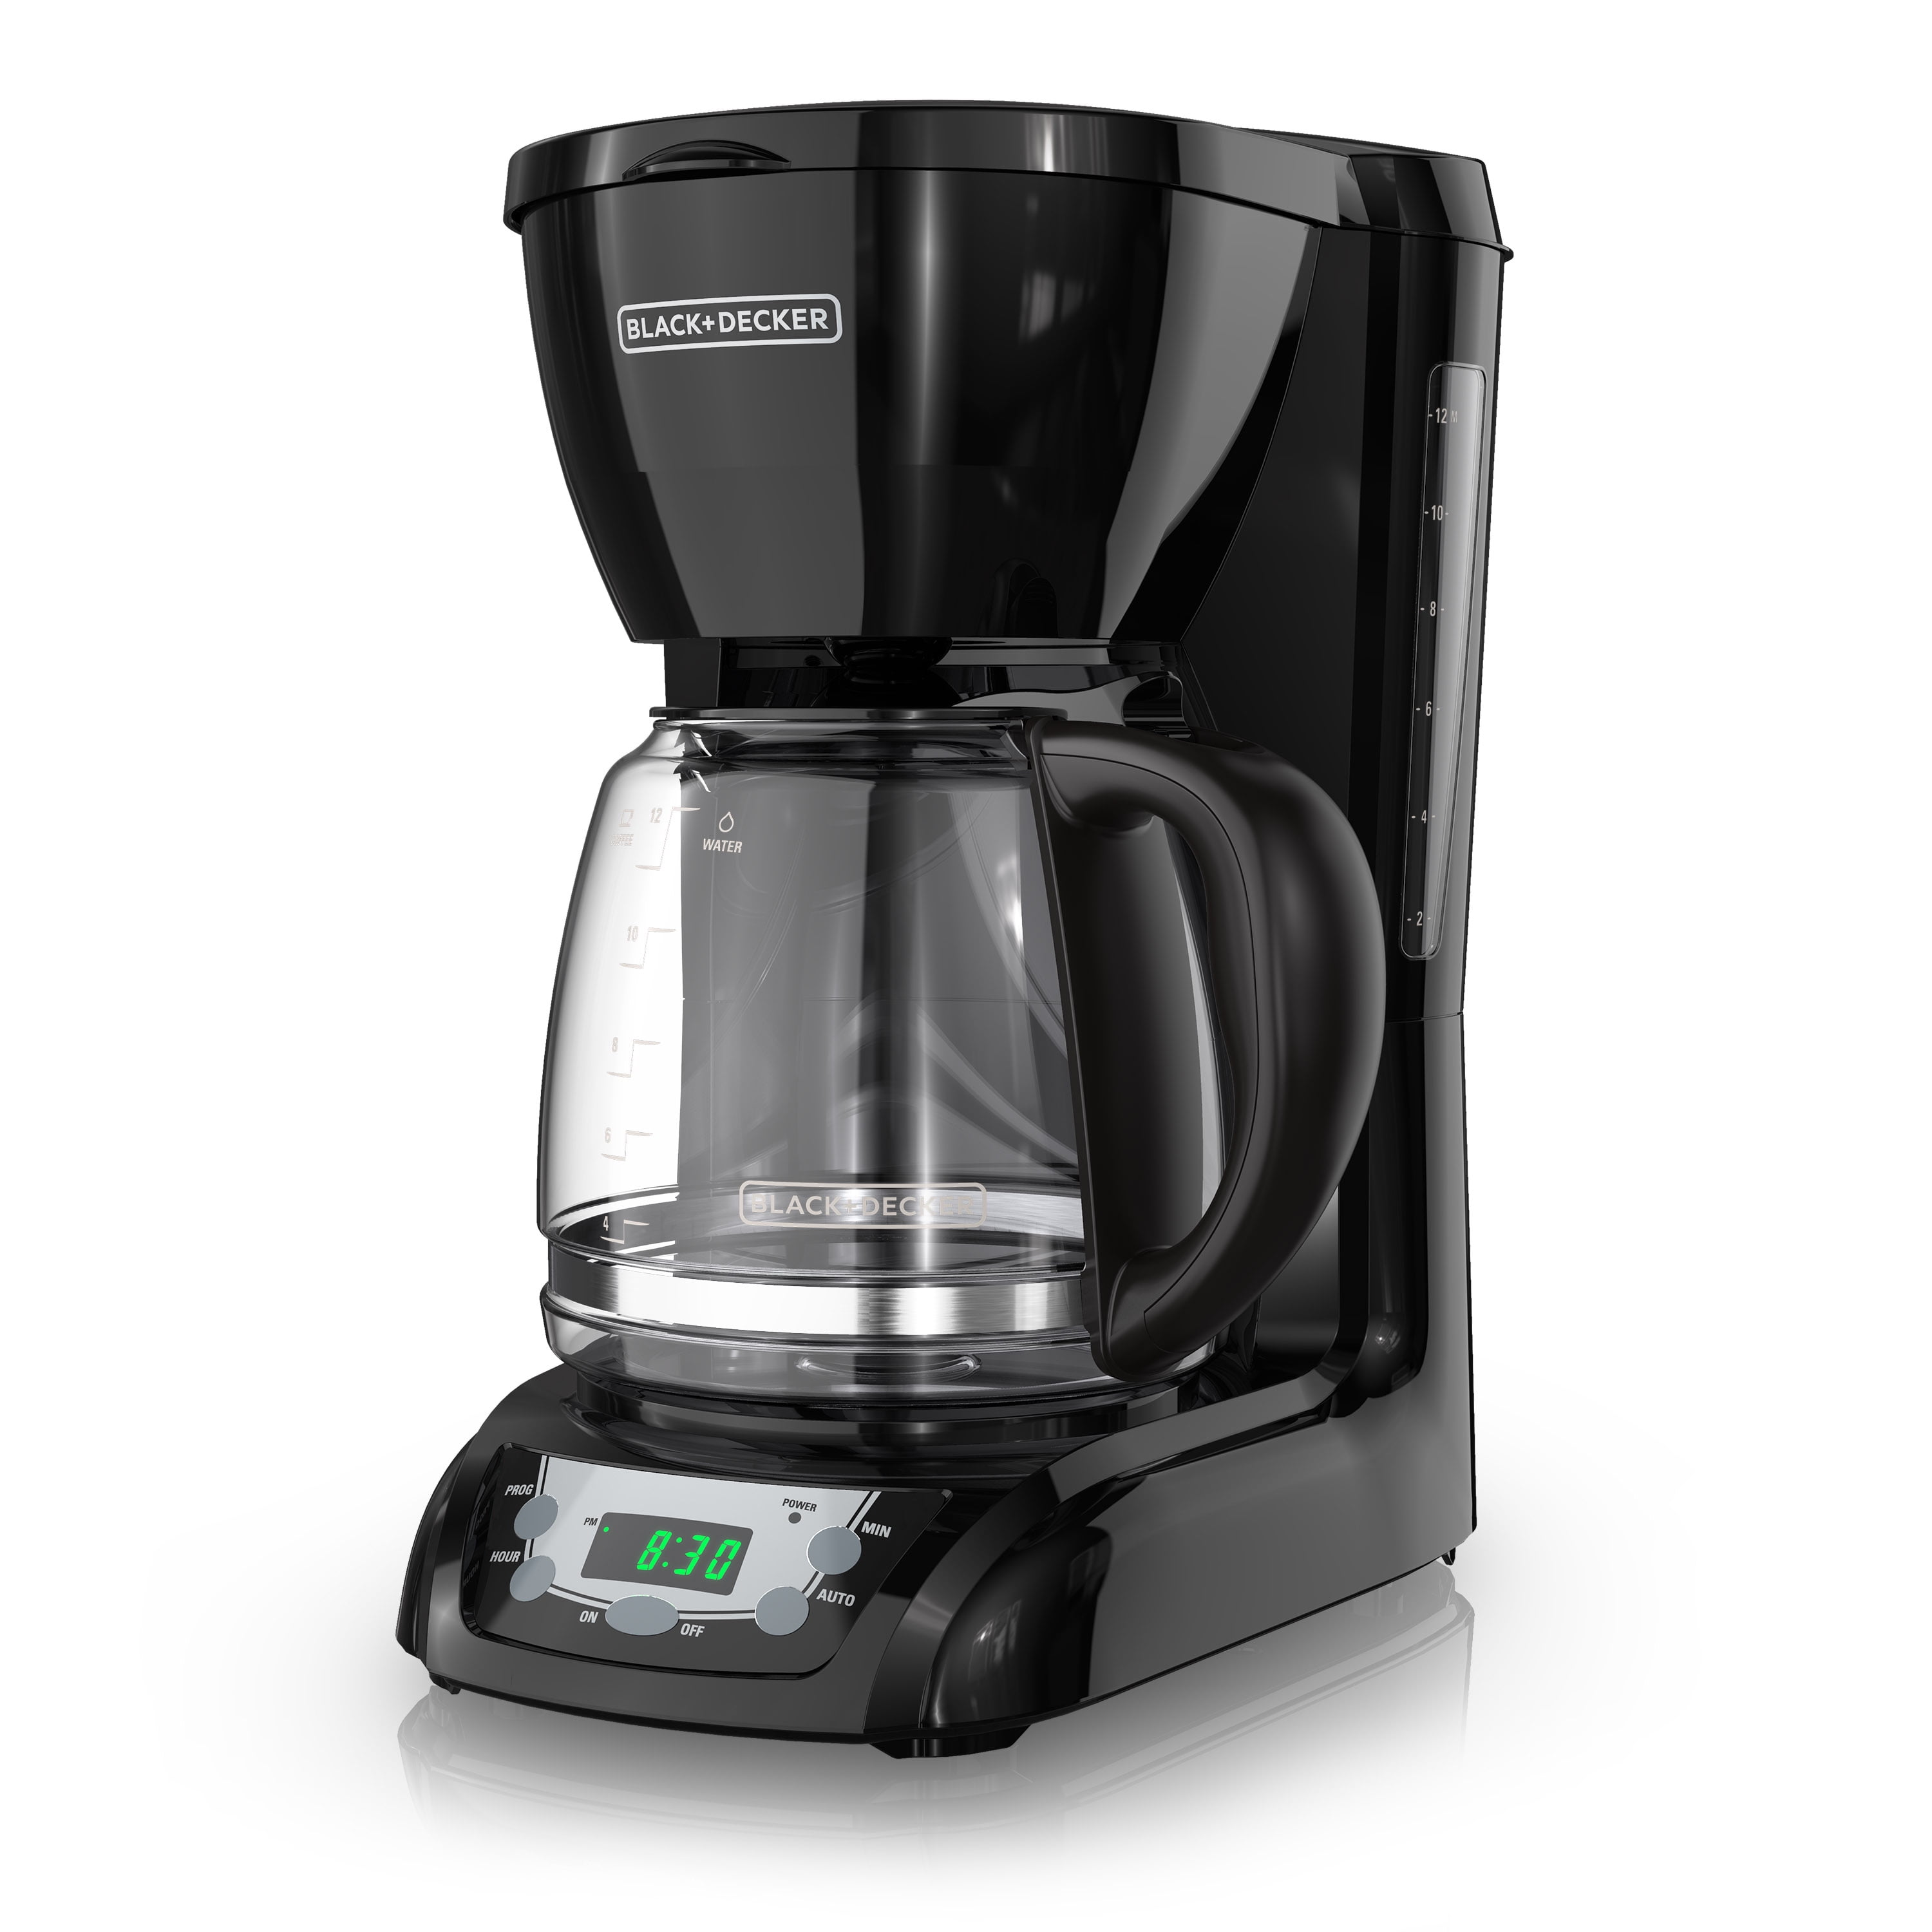 Reviews for BLACK+DECKER 12-Cup Programmable Black Drip Coffee